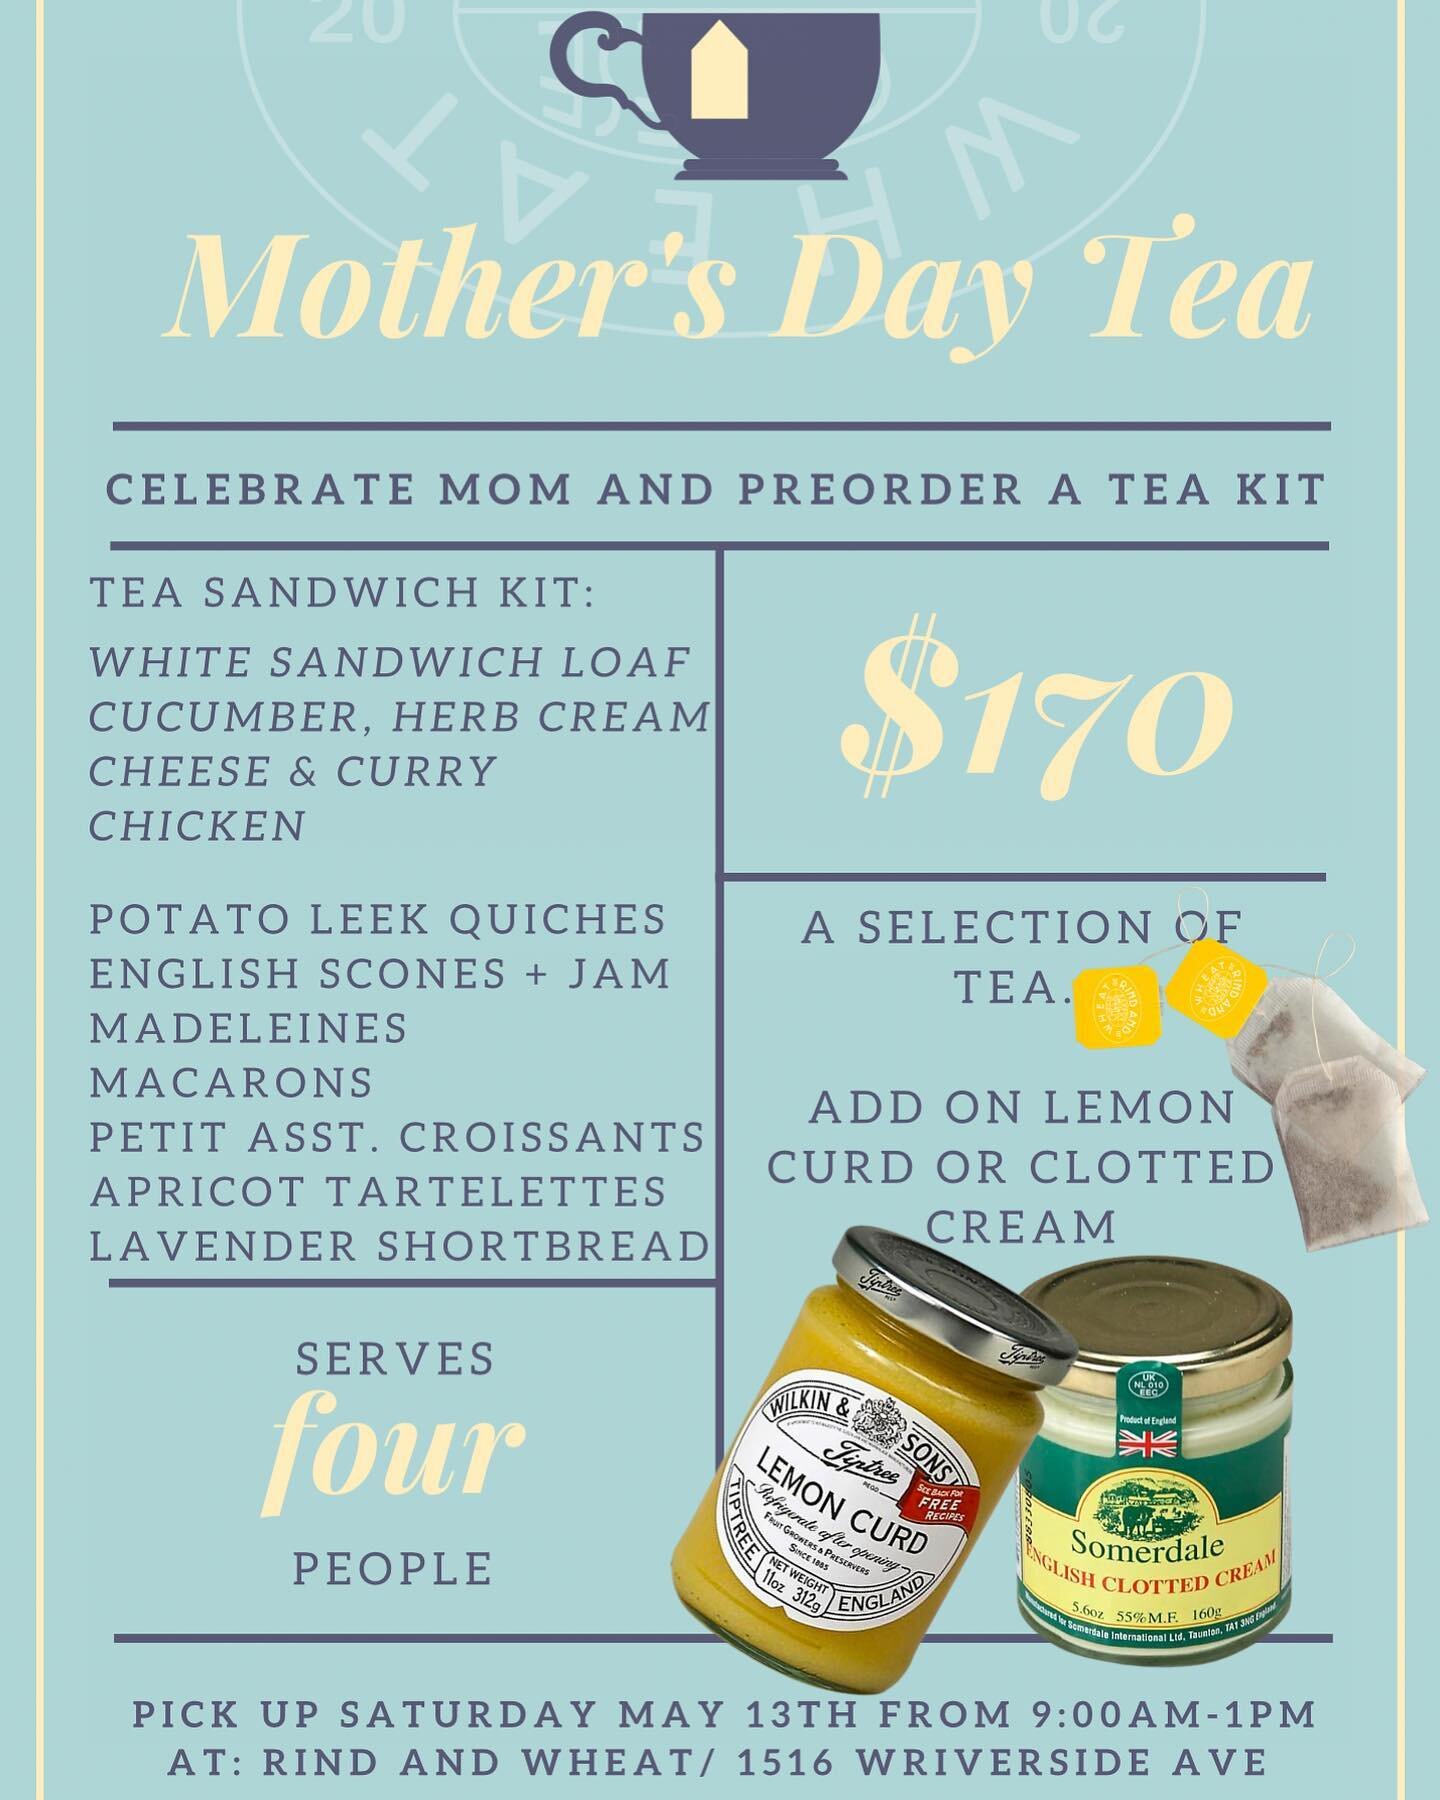 Our Mother&rsquo;s Day Tea Kit is back, and available for preorder now (link in bio). We&rsquo;ve sold out of this the past couple of years, so if your interested, place those orders soon. Order pickup from @rindandwheat Sat, May 13th.

Treat mom lik